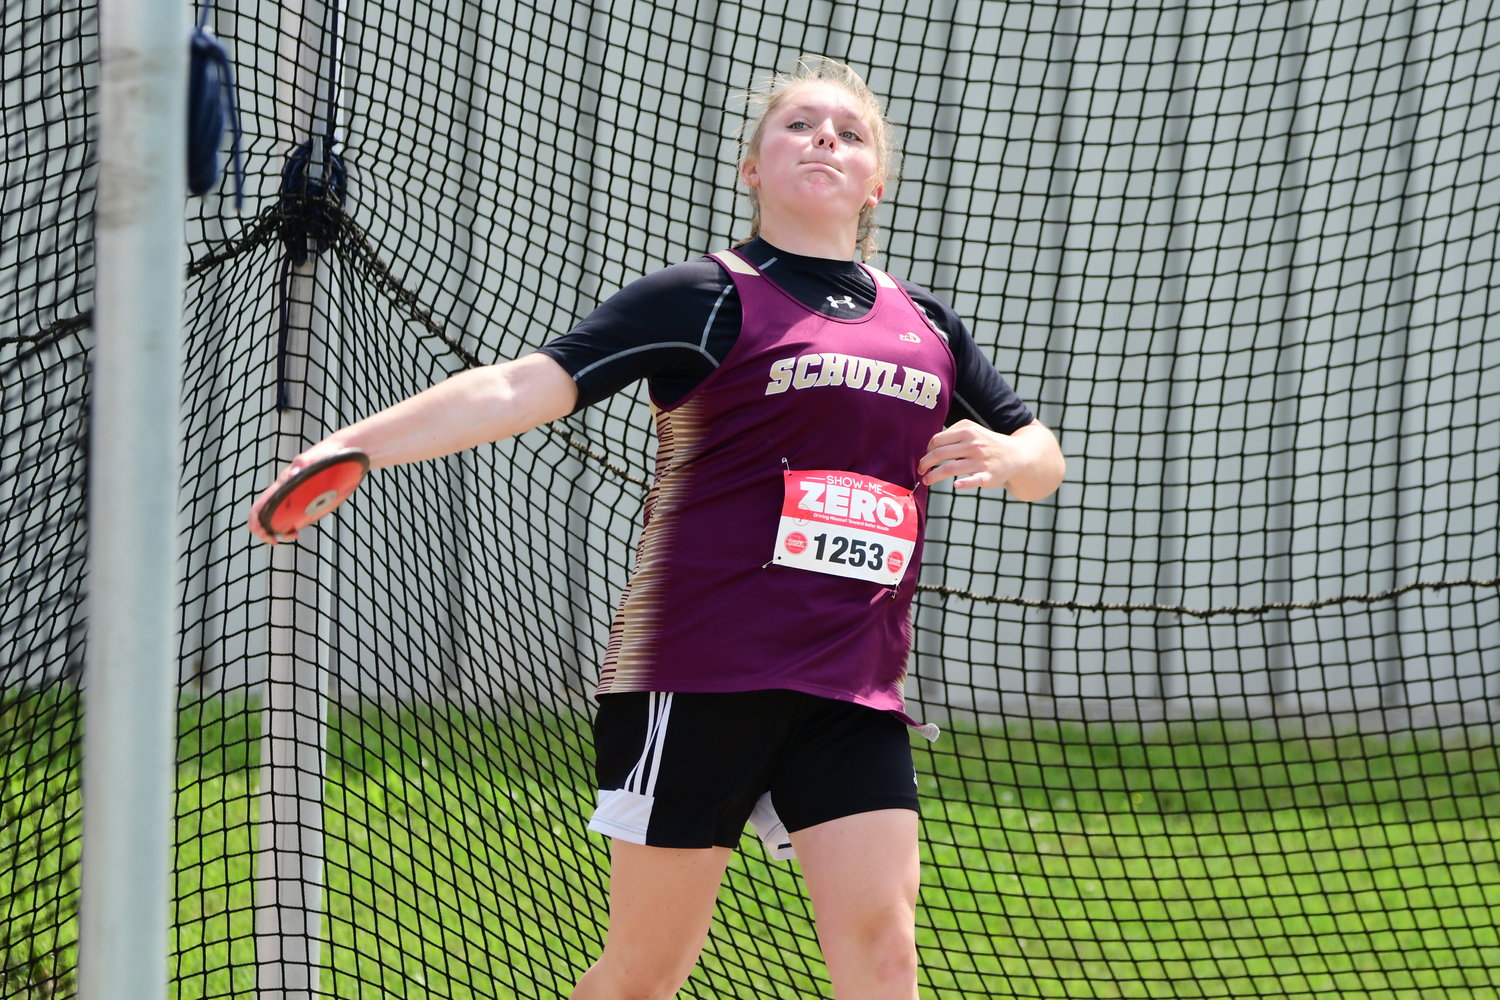 Schuyler's Kait Hatfield finishes strong to win state discus title | Daily Express